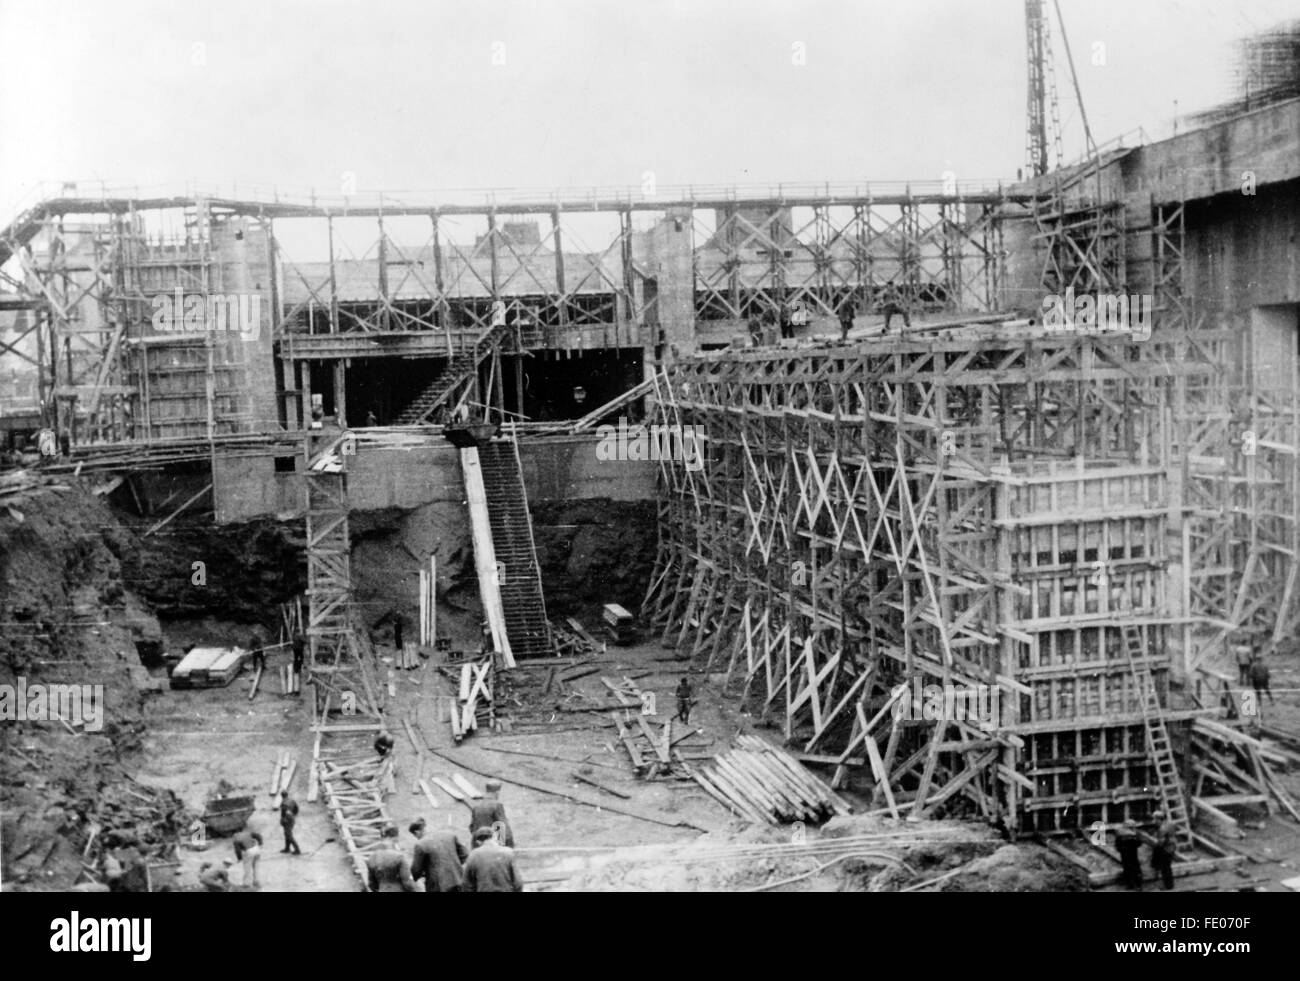 The Nazi propaganda picture shows the construction of a submarine pen by the Todt Organisation at the Atlantic Coast. The photo was taken in March 1942. Fotoarchiv für Zeitgeschichtee - NO WIRE SERVICE - Stock Photo